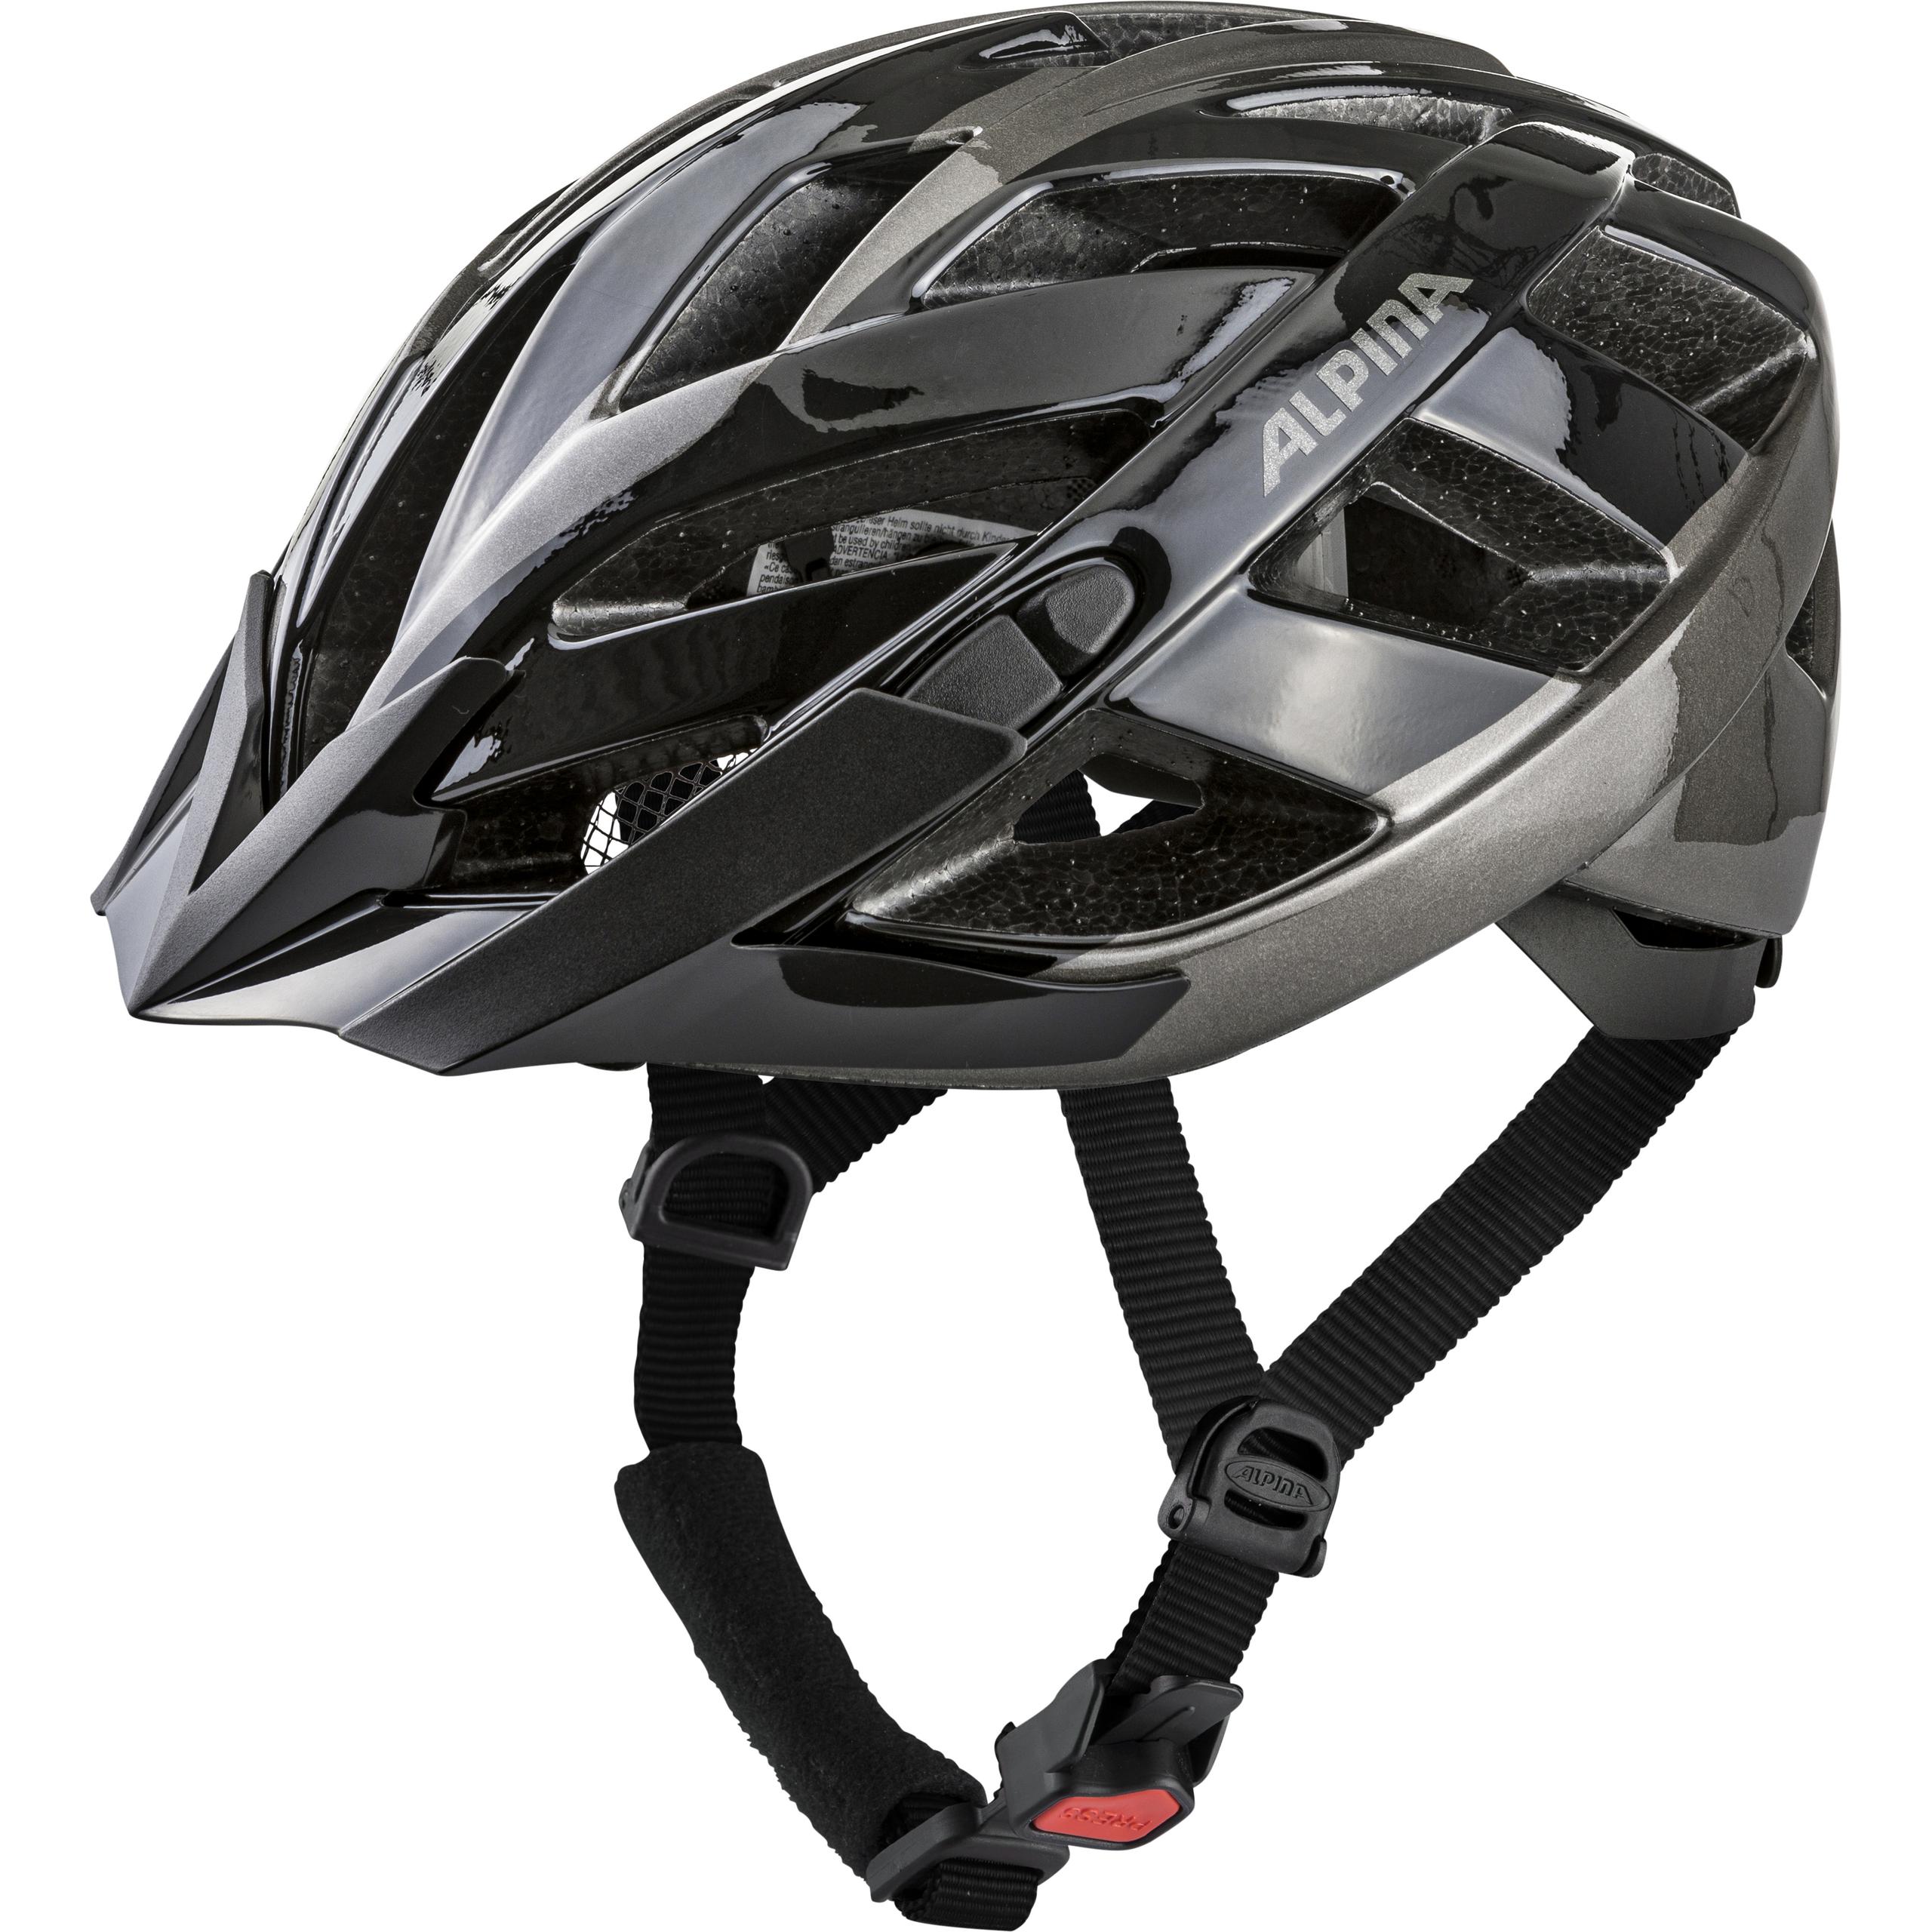 ALPINA PANOMA 2.0 BLACK ANTHRACITE KASK ROWEROWY R. 52-57 CM <is>